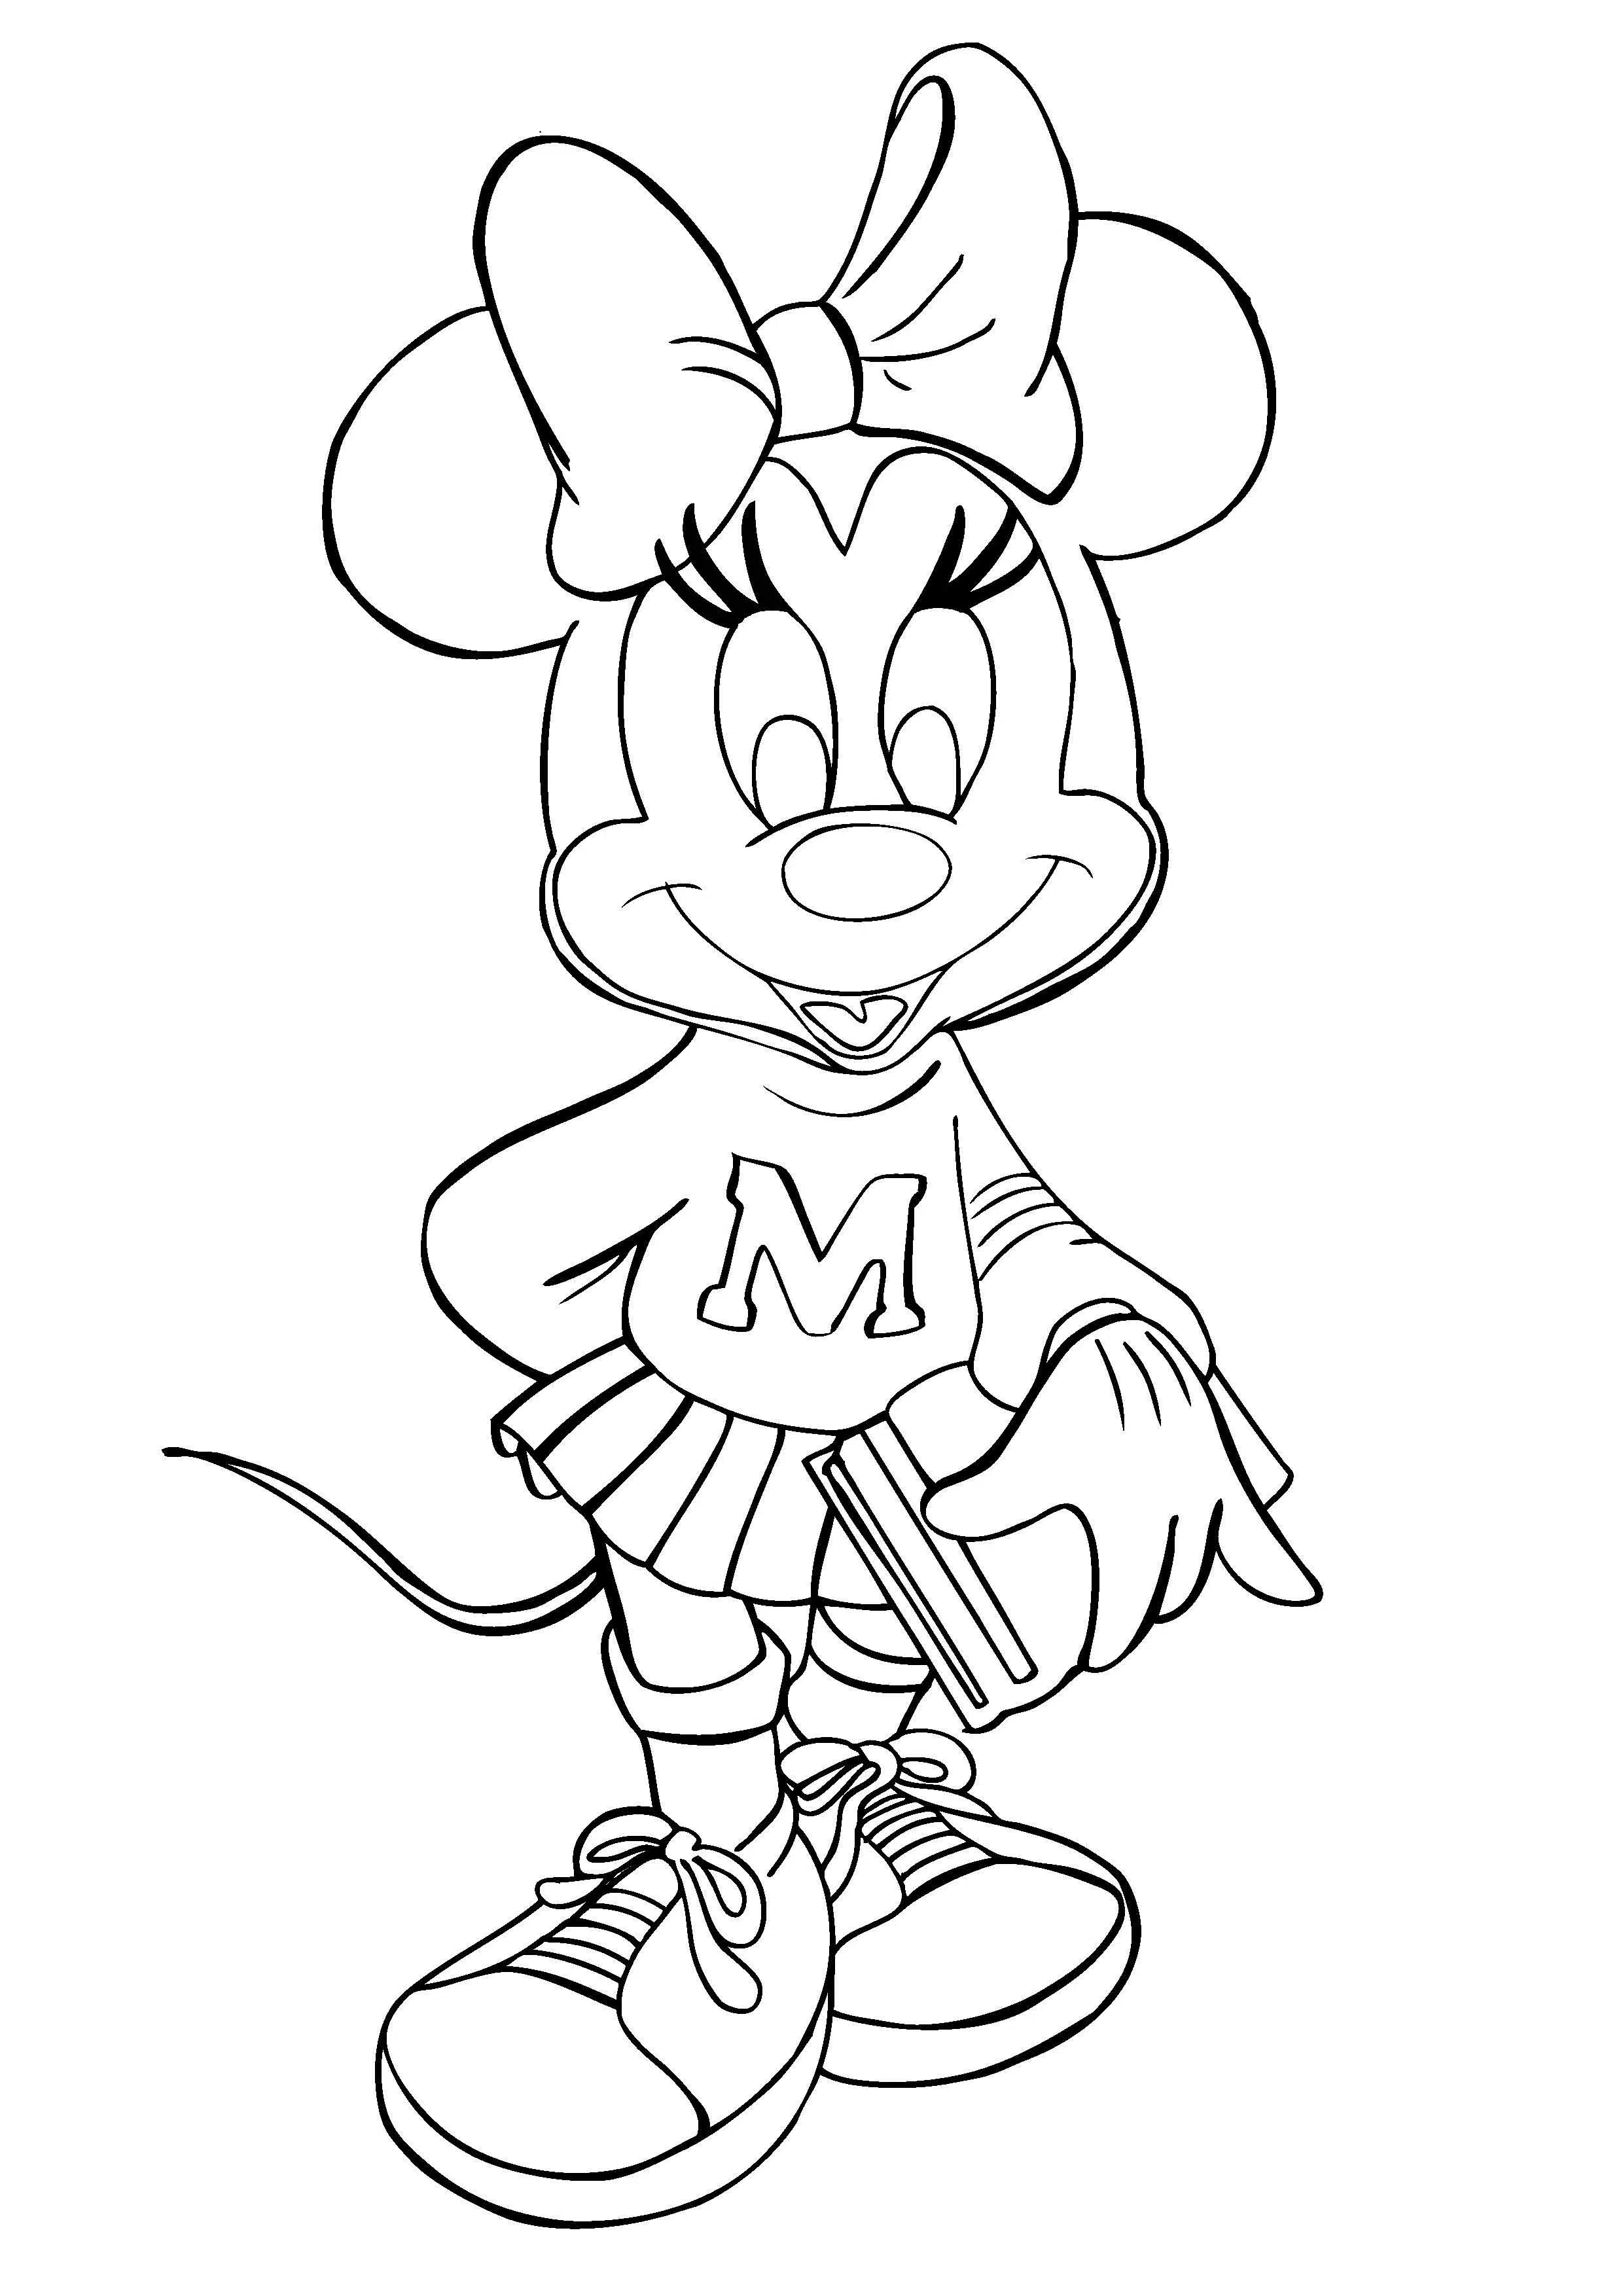 Minnie mouse 9